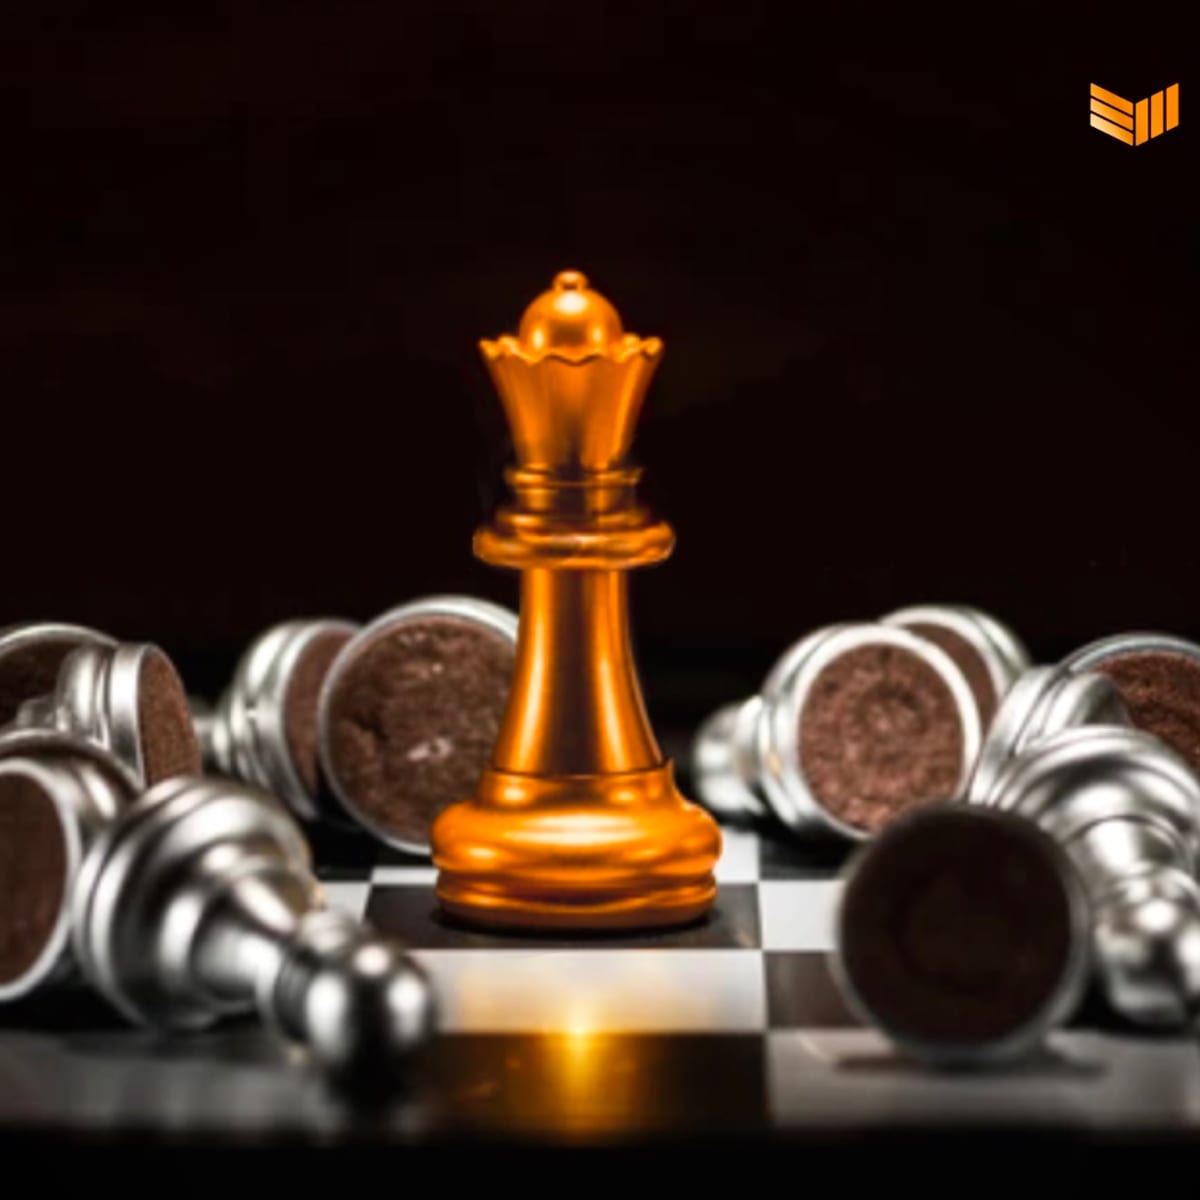 Gotham Chess, a very popular chess streamer, partners with Crypto